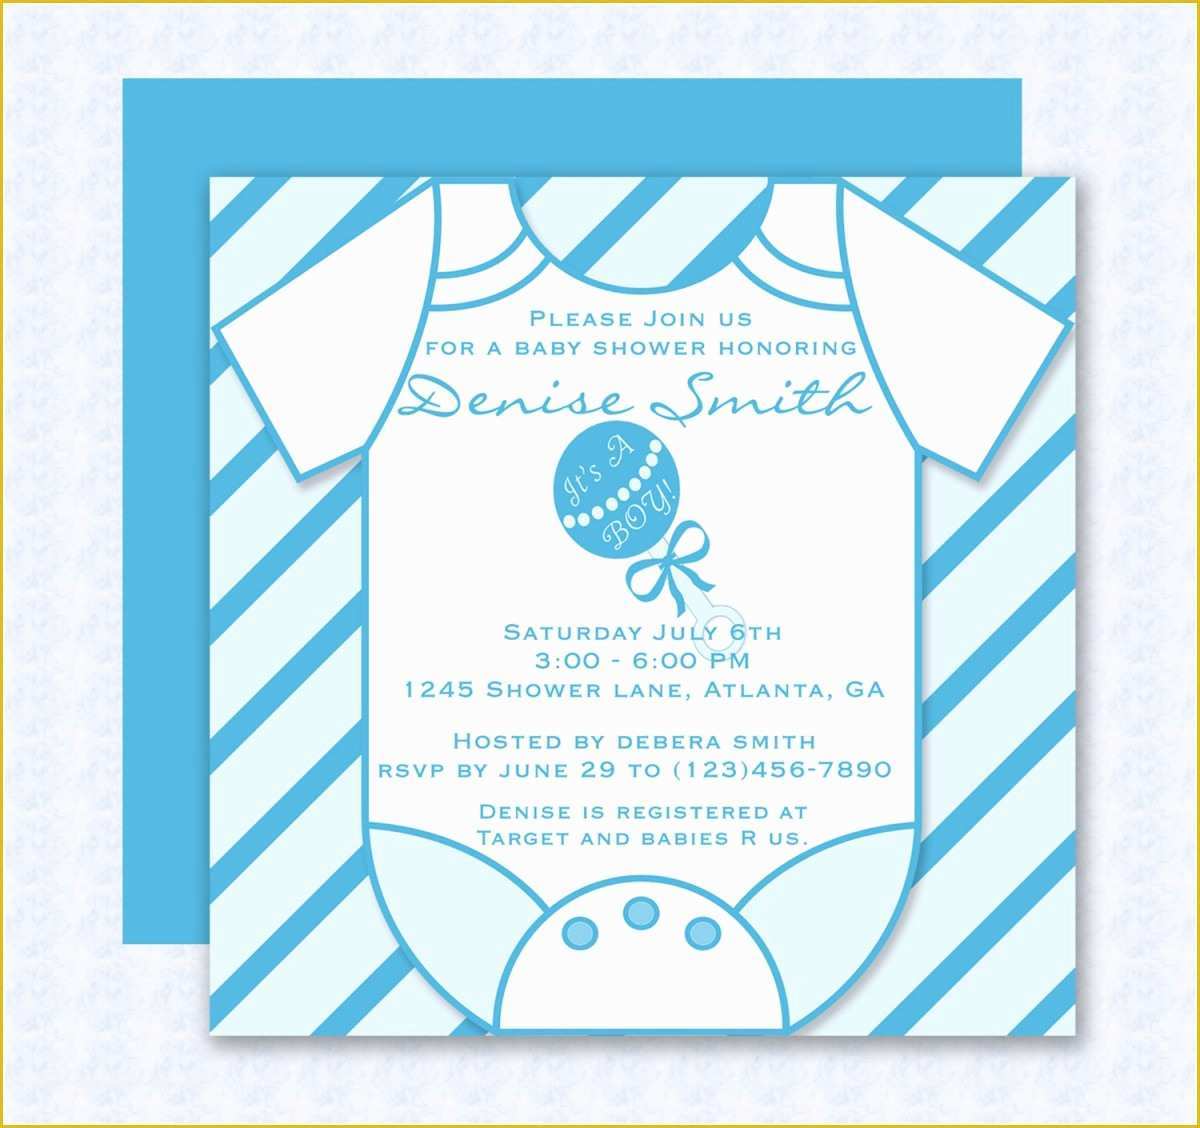 free-baby-shower-invitation-templates-microsoft-word-of-inspirational-sprinkle-baby-shower